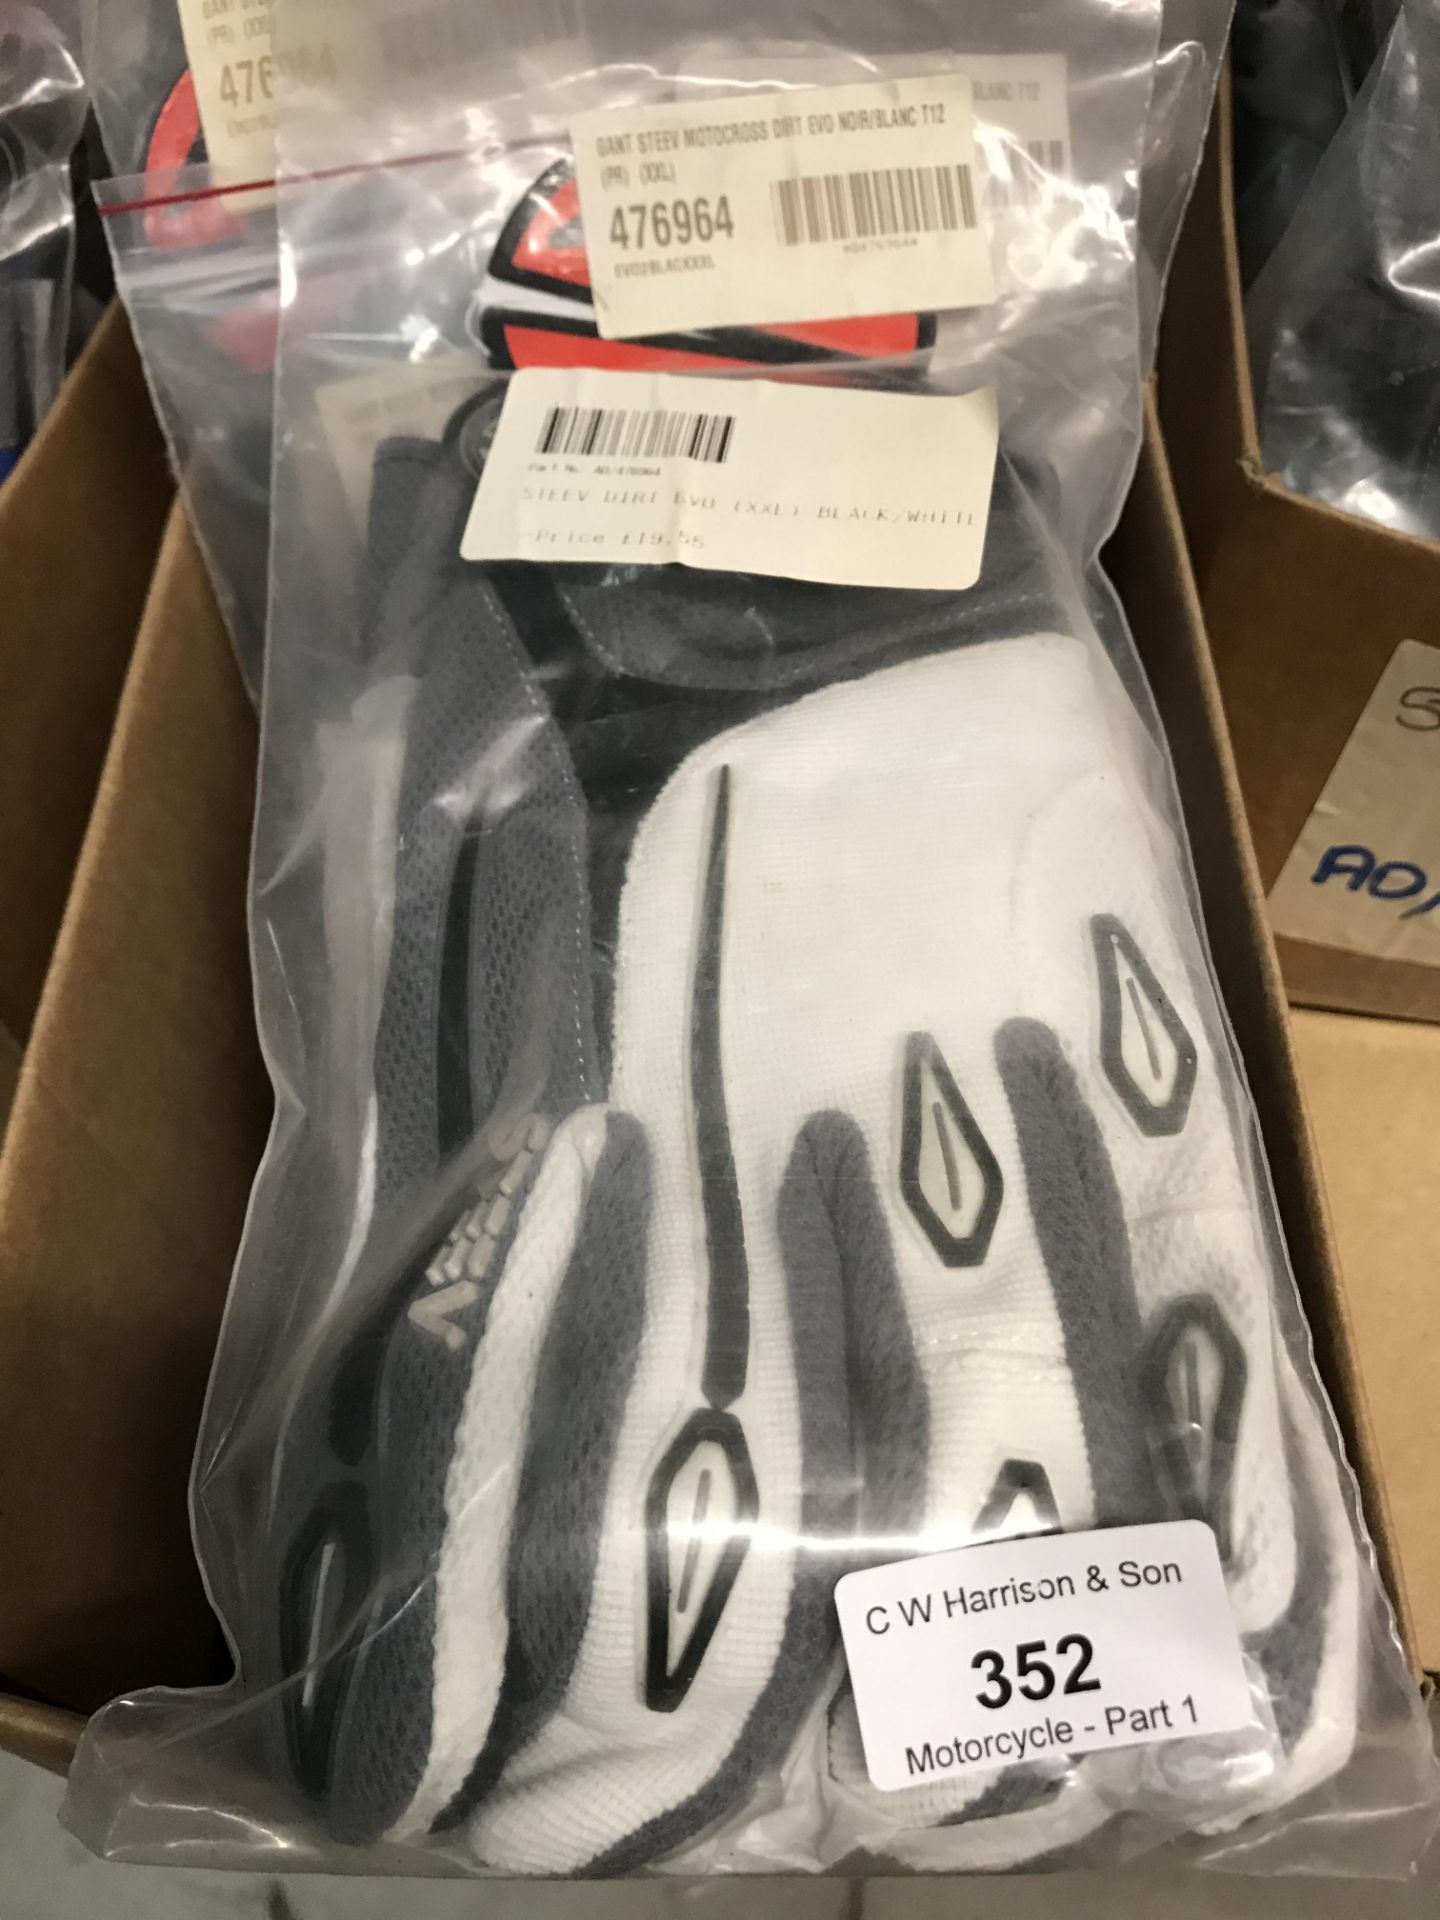 Contents to box - 4 x pairs of Steev Dirt Evo gloves - grey/white - XXL